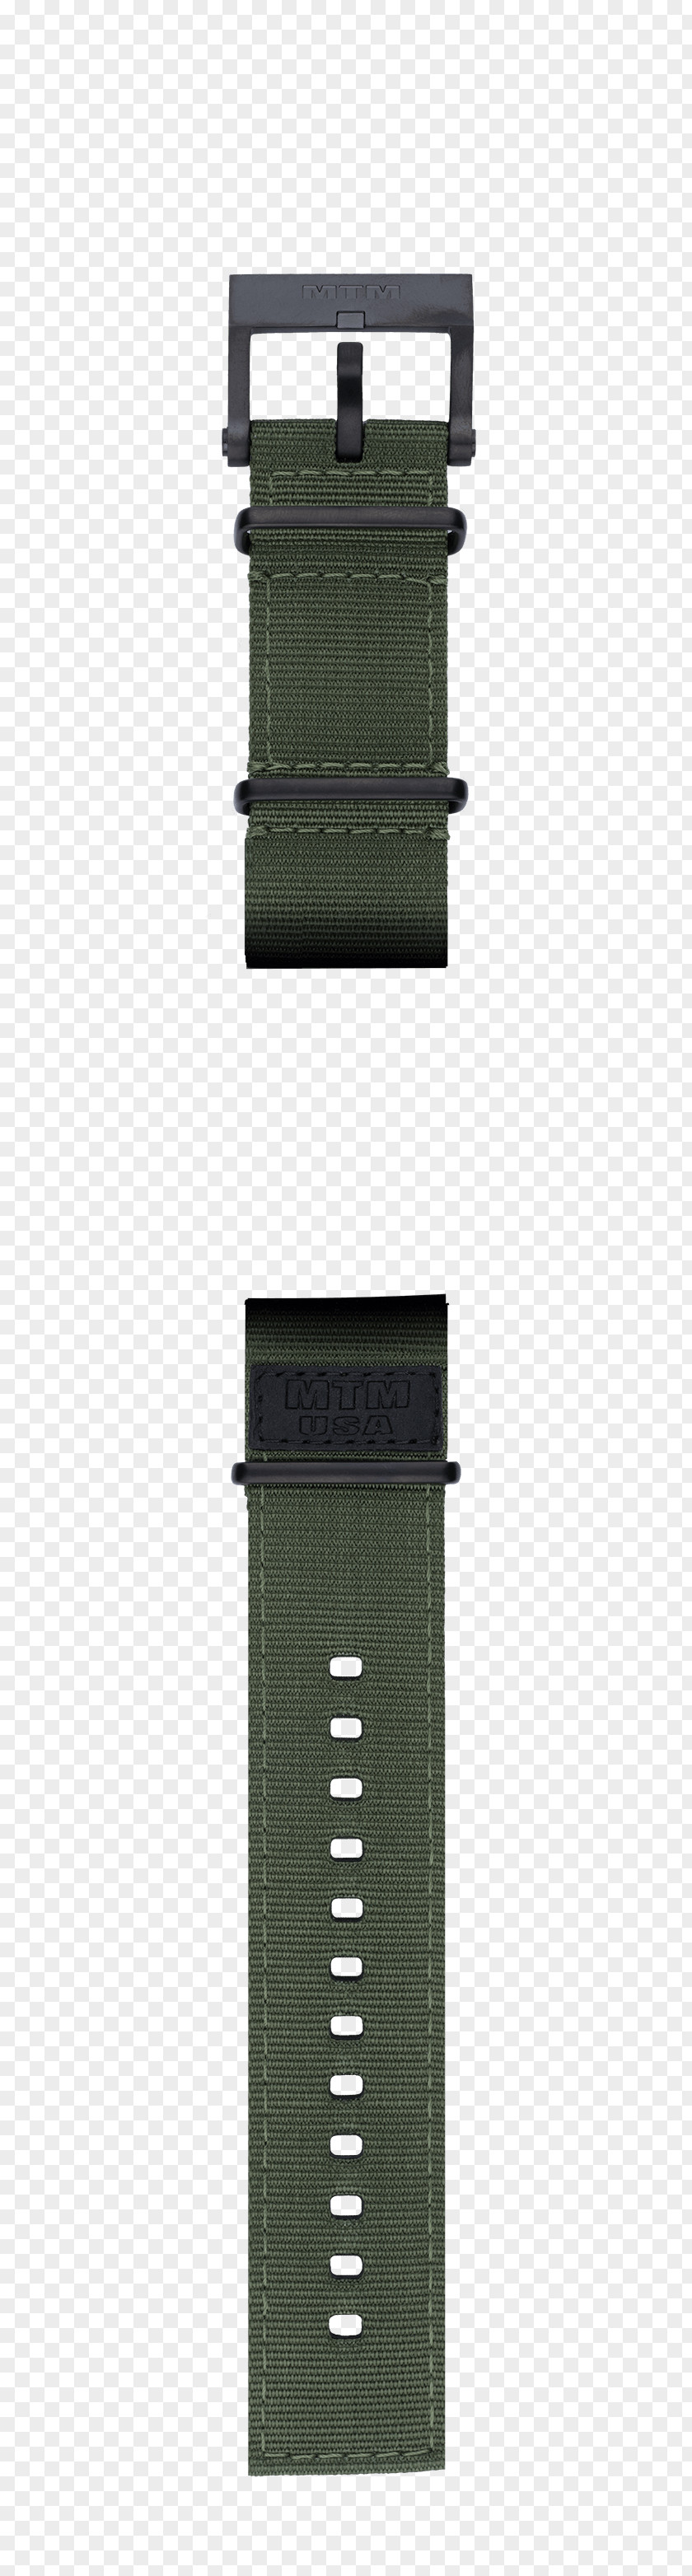 Swatch Radiation Geiger Counters Light Gray PNG